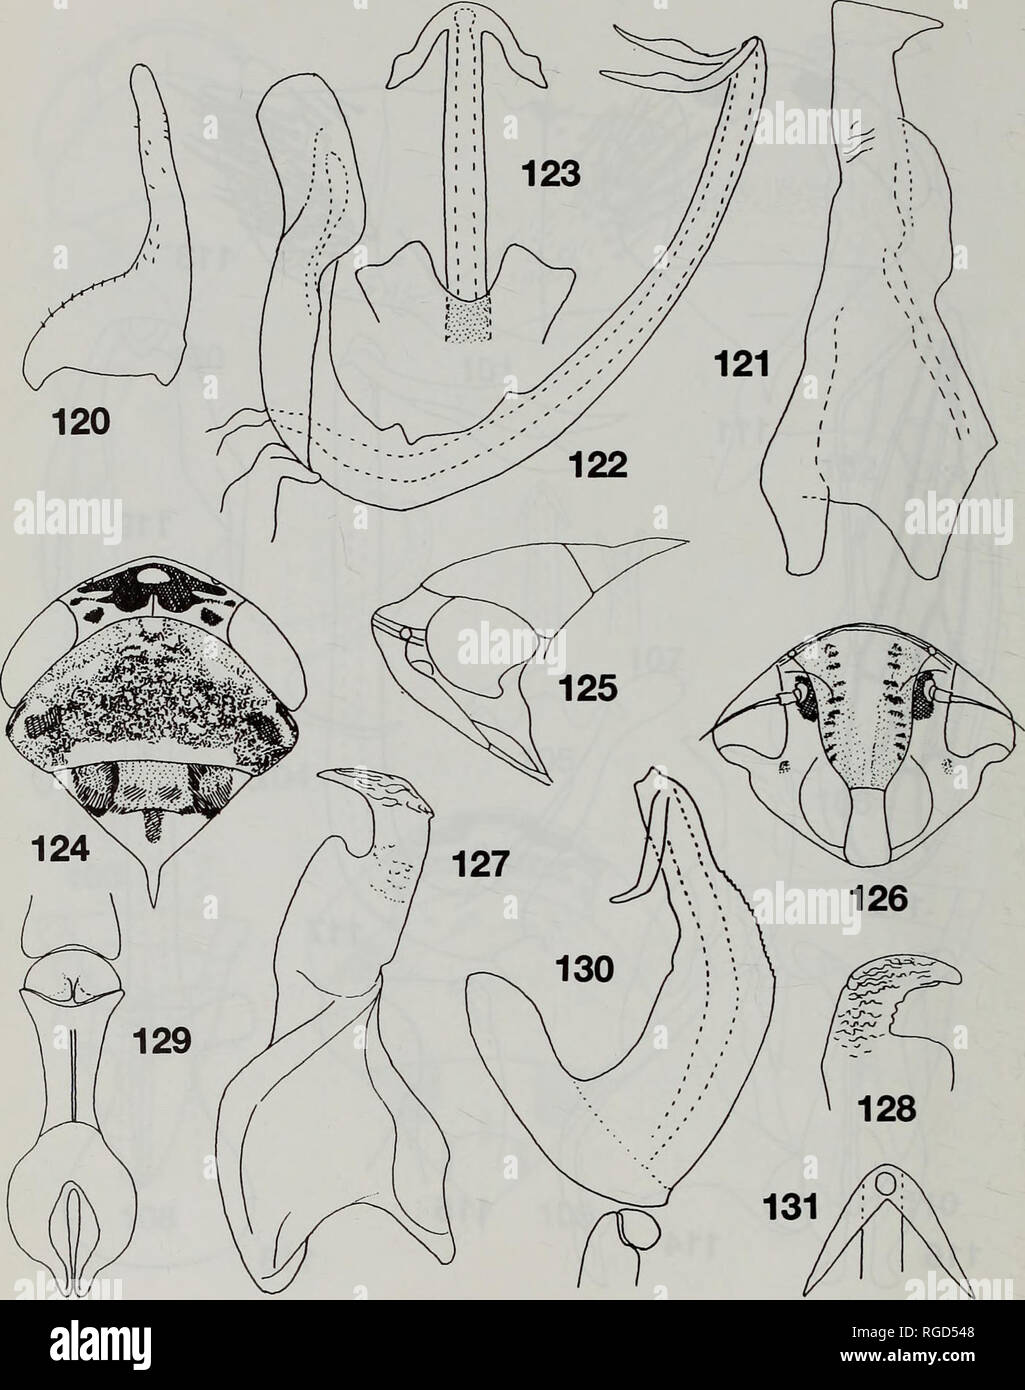 . Bulletin of the Natural History Museum Entomology. C.A. VIRAKTAMATH. Figs 120-131. Carvaka spp. 120-123, Carvaka confusa: 120, subgenital plate; 121, style; 122, aedeagus lateral view; 123, aedeagal shaft and part of dorsal apodeme, cephalic view. 124-131, Carvaka synavei: 124, head and thorax; 125, same, profile; 126, face; 127, style; 128, apophysis of style; 129, connective and interconnecting sclerite; 130, intermediate sclerite and aedeagus, lateral view; 131, apex of aedeagal shaft, dorsal view.. Please note that these images are extracted from scanned page images that may have been di Stock Photo